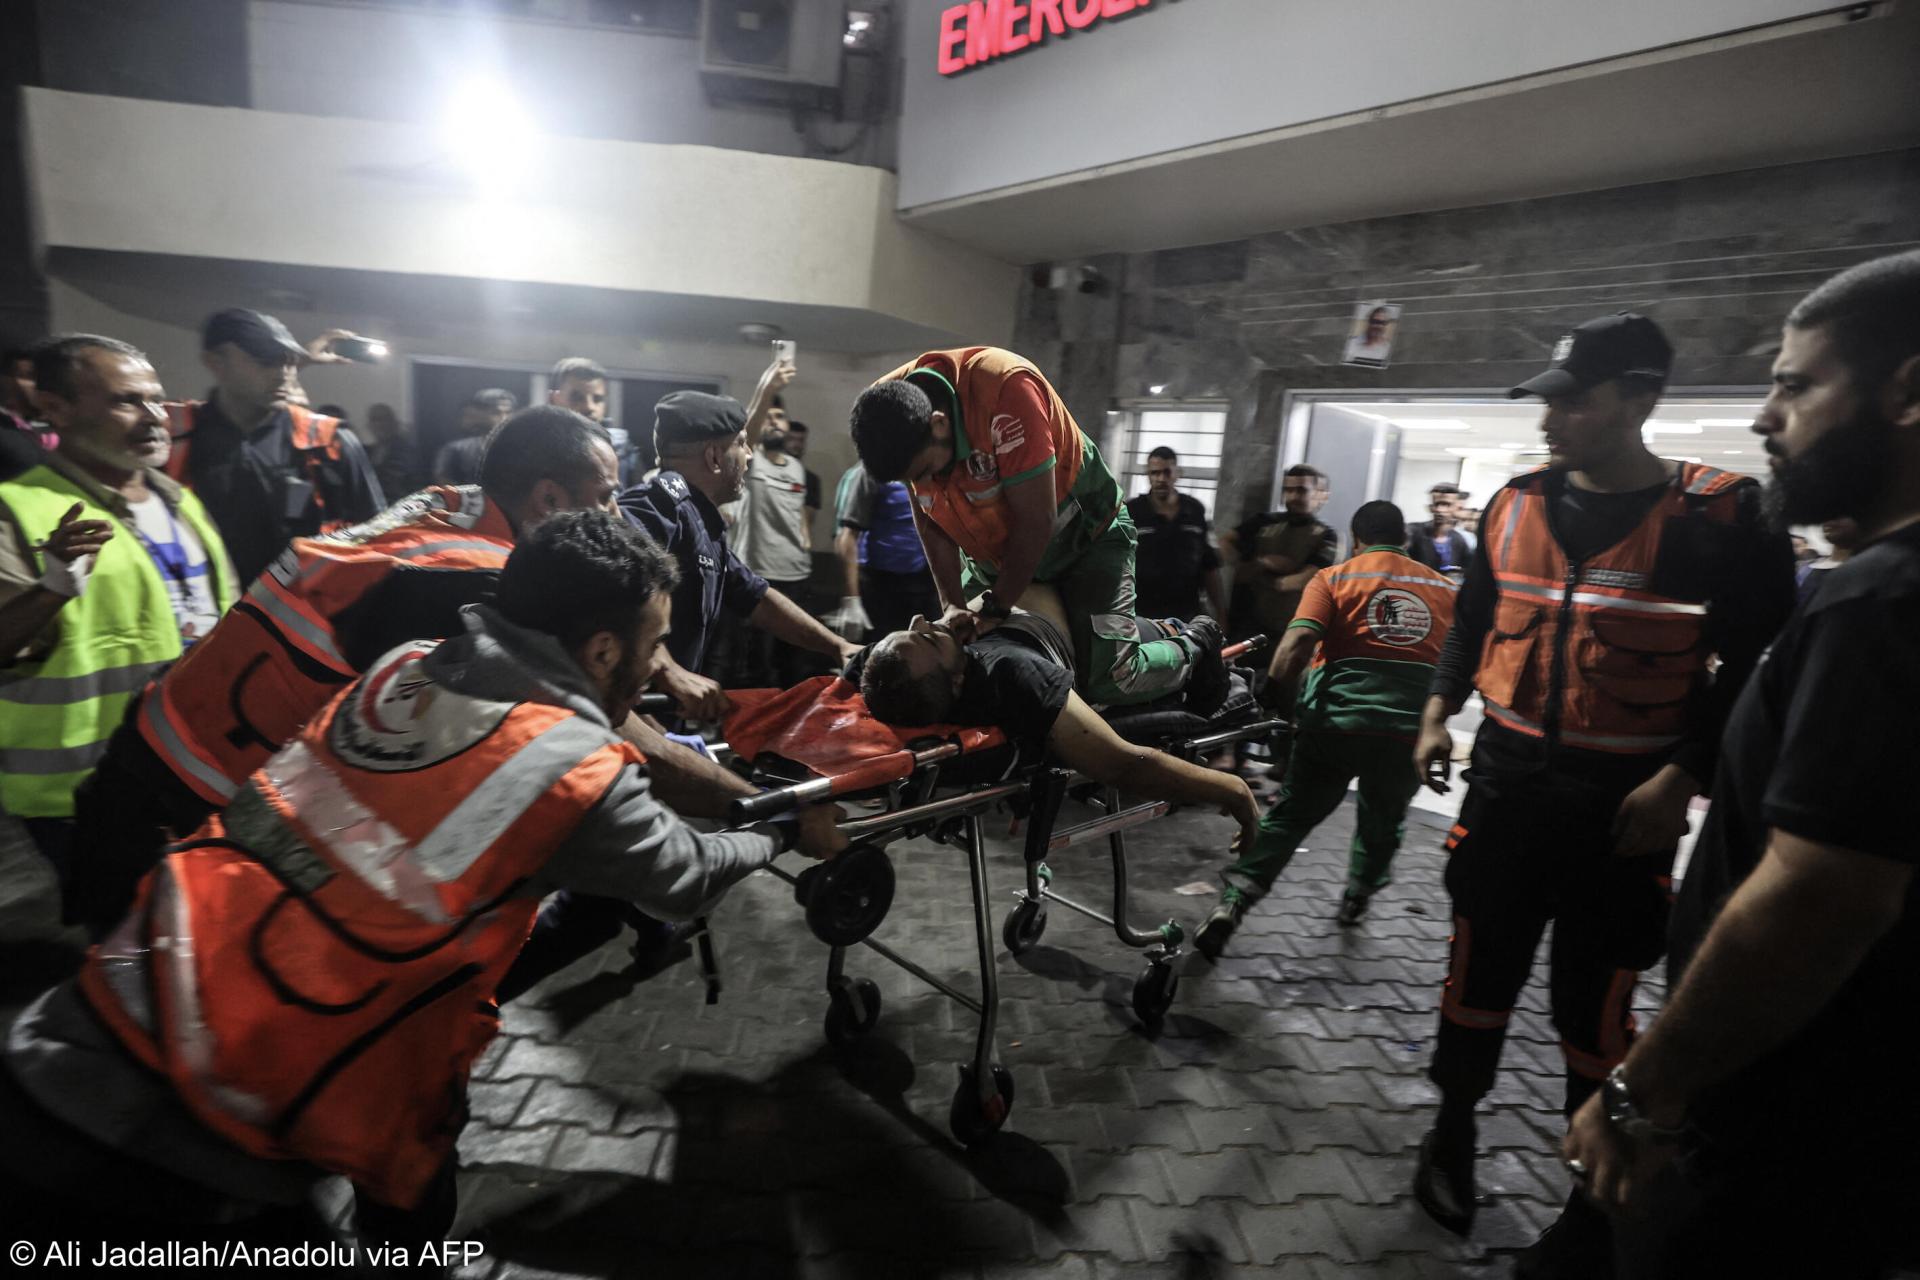 Gaza: The wounded are in danger of dying in the next few hours